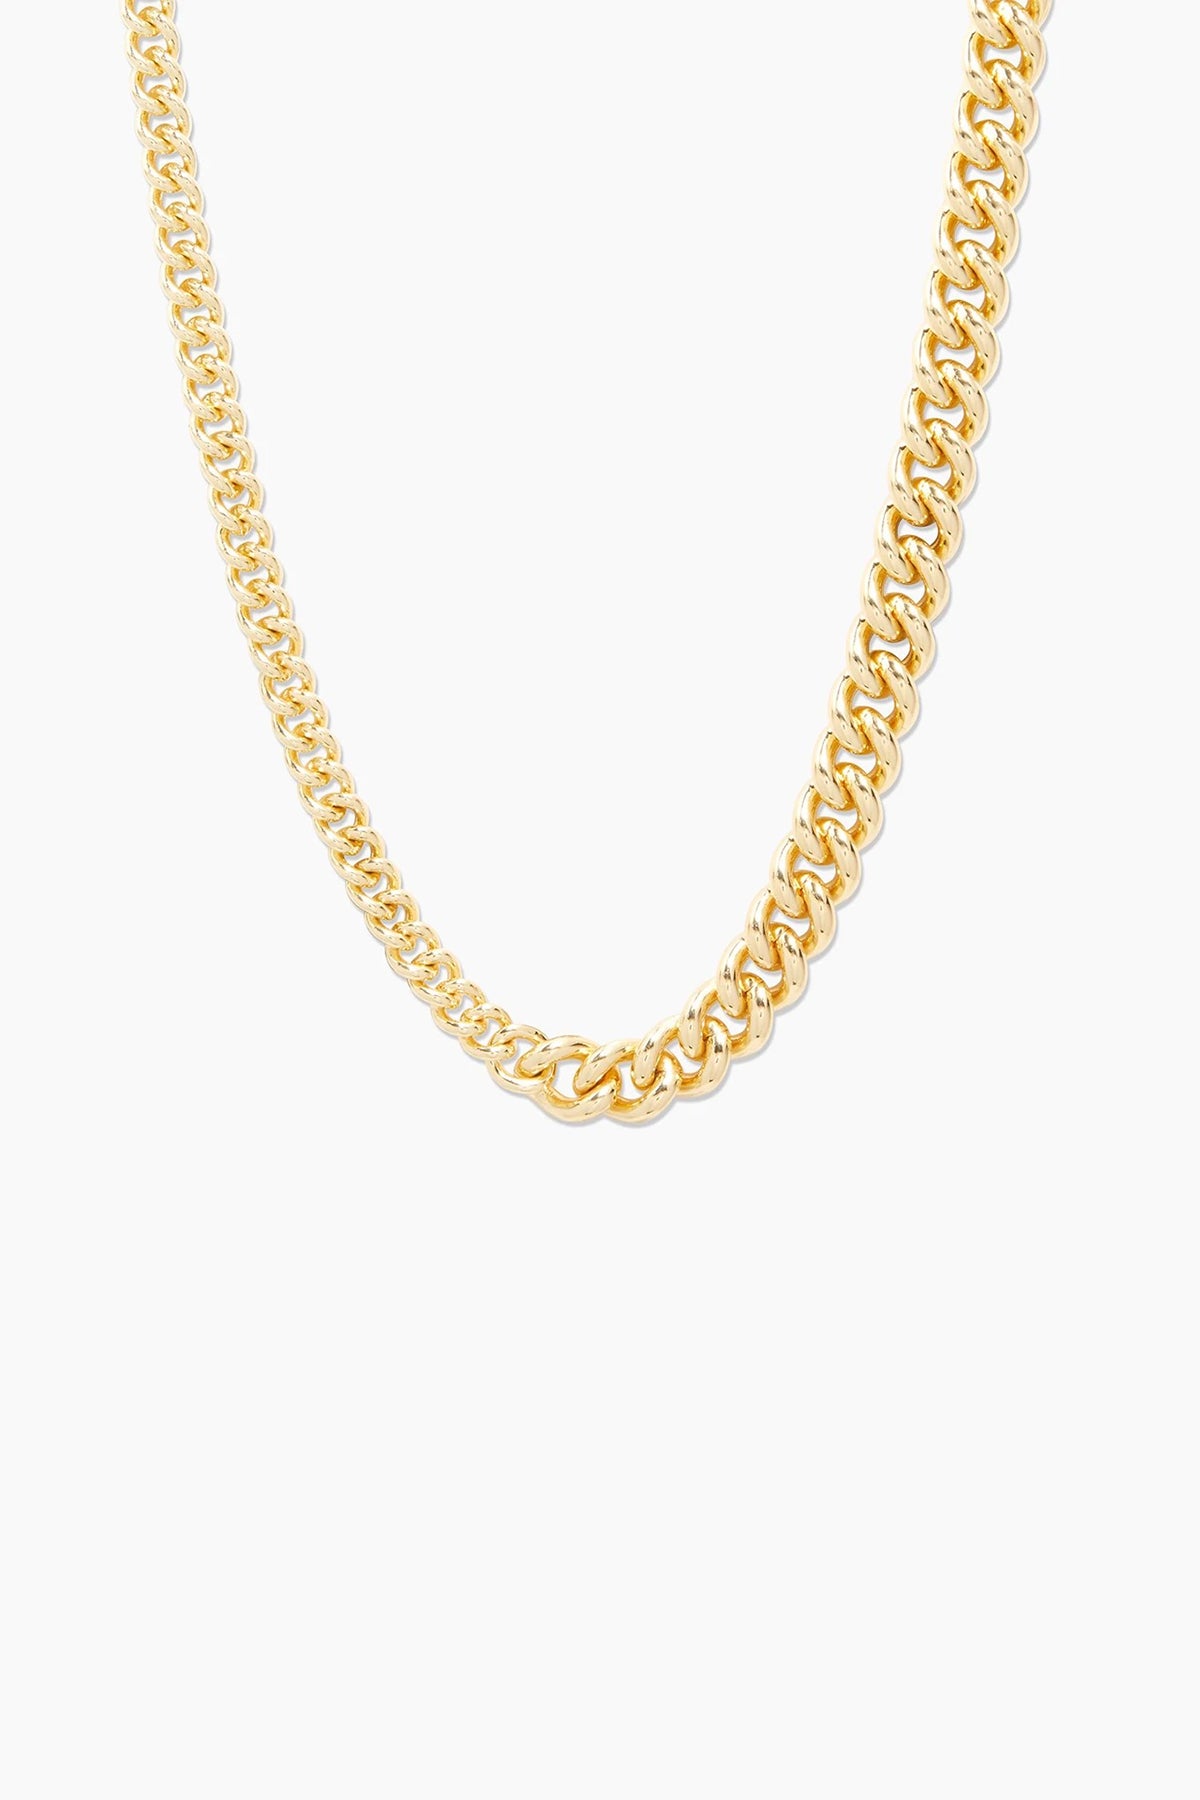 Women' Business Lou Link Asymmetrical Necklace - Gold NORA GARDNER | OFFICIAL STORE for work and office